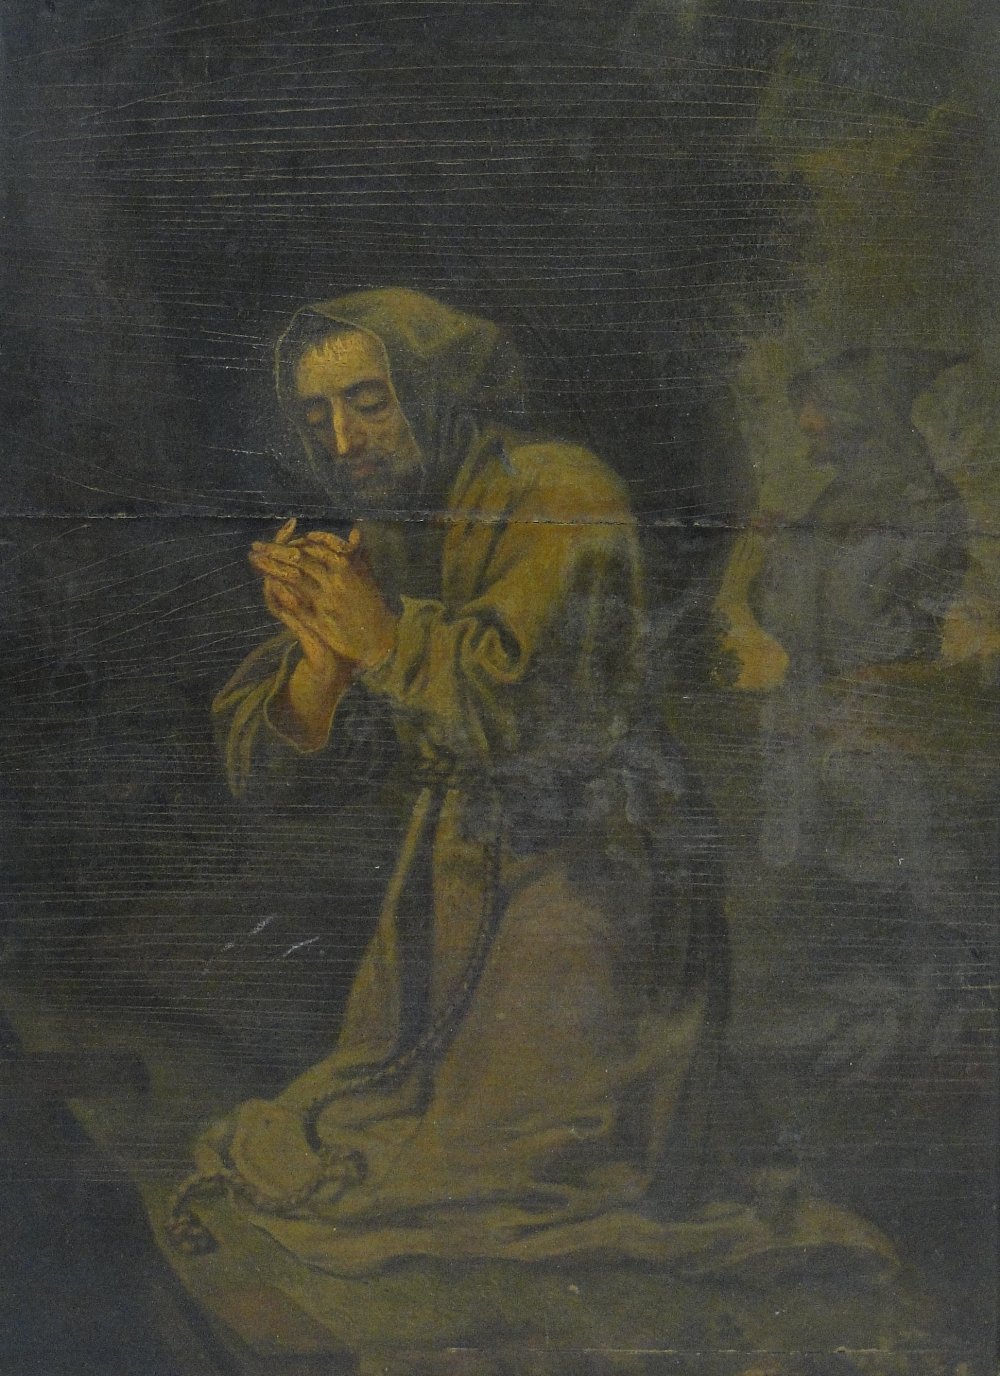 18/19th century oil on wood panel, a praying monk, unsigned, inscribed verso "Beluccia" (?) 15" x